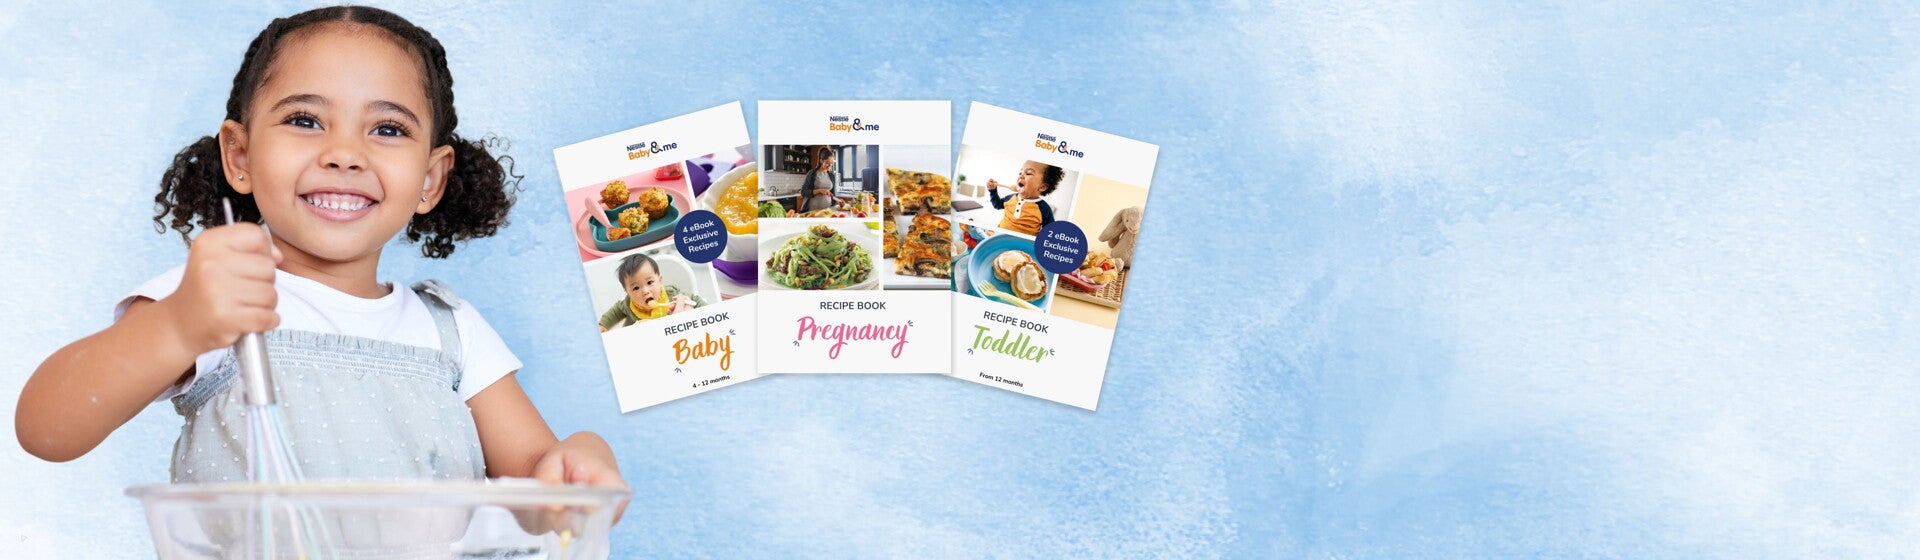 Nestle Baby and me erecipe book homepage banner